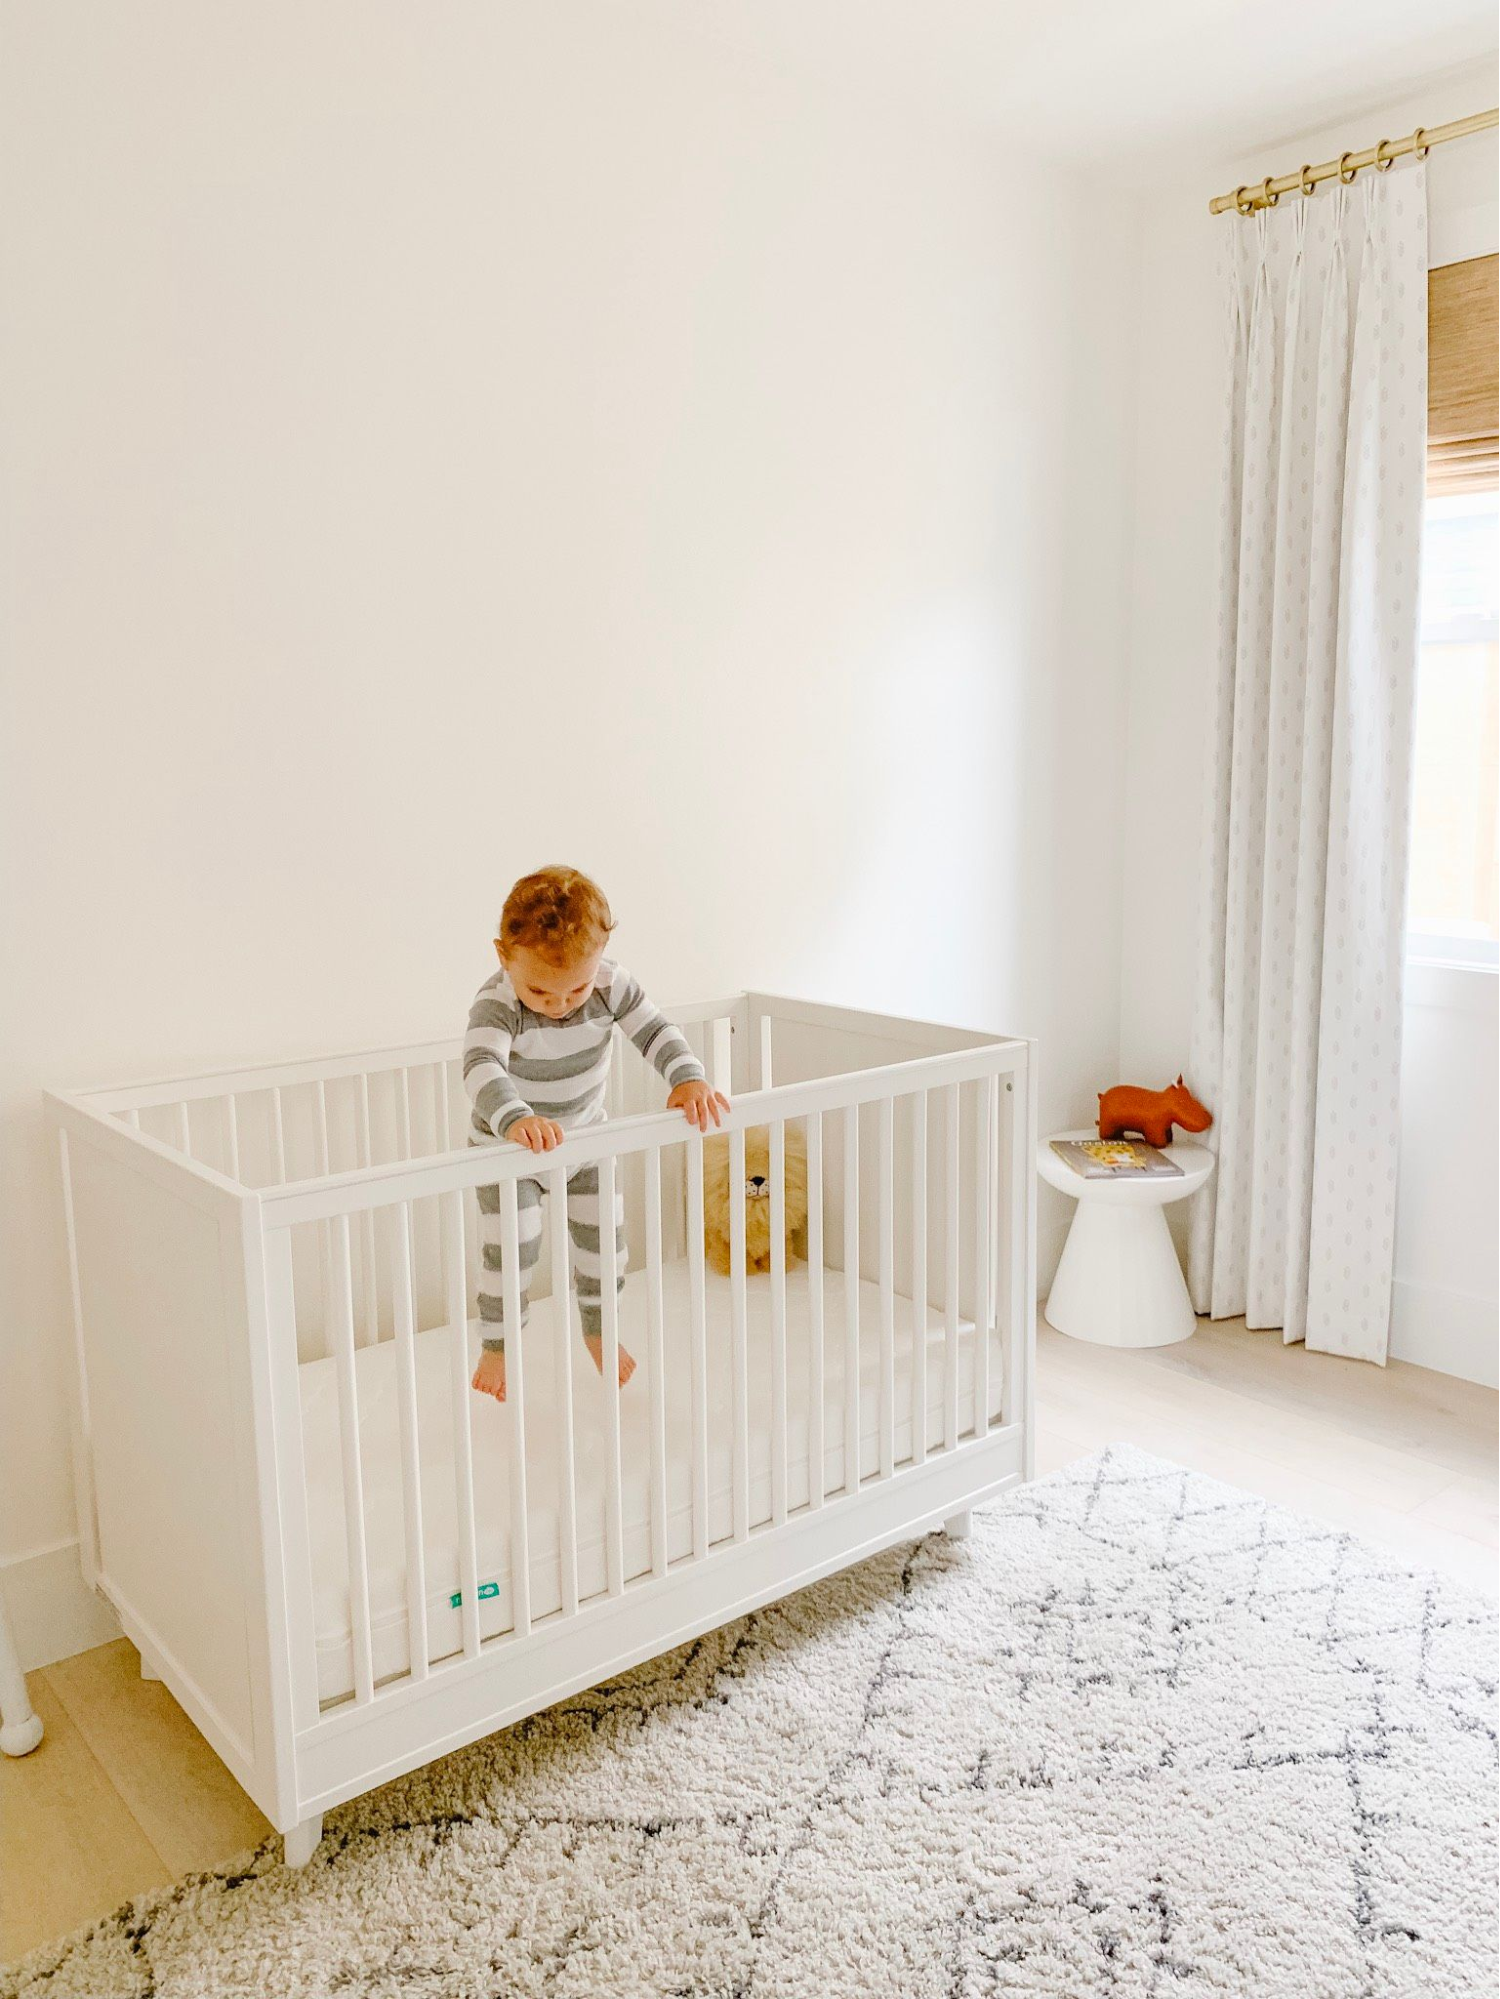 Minimalist Baby Registry Checklist: What You Really Need